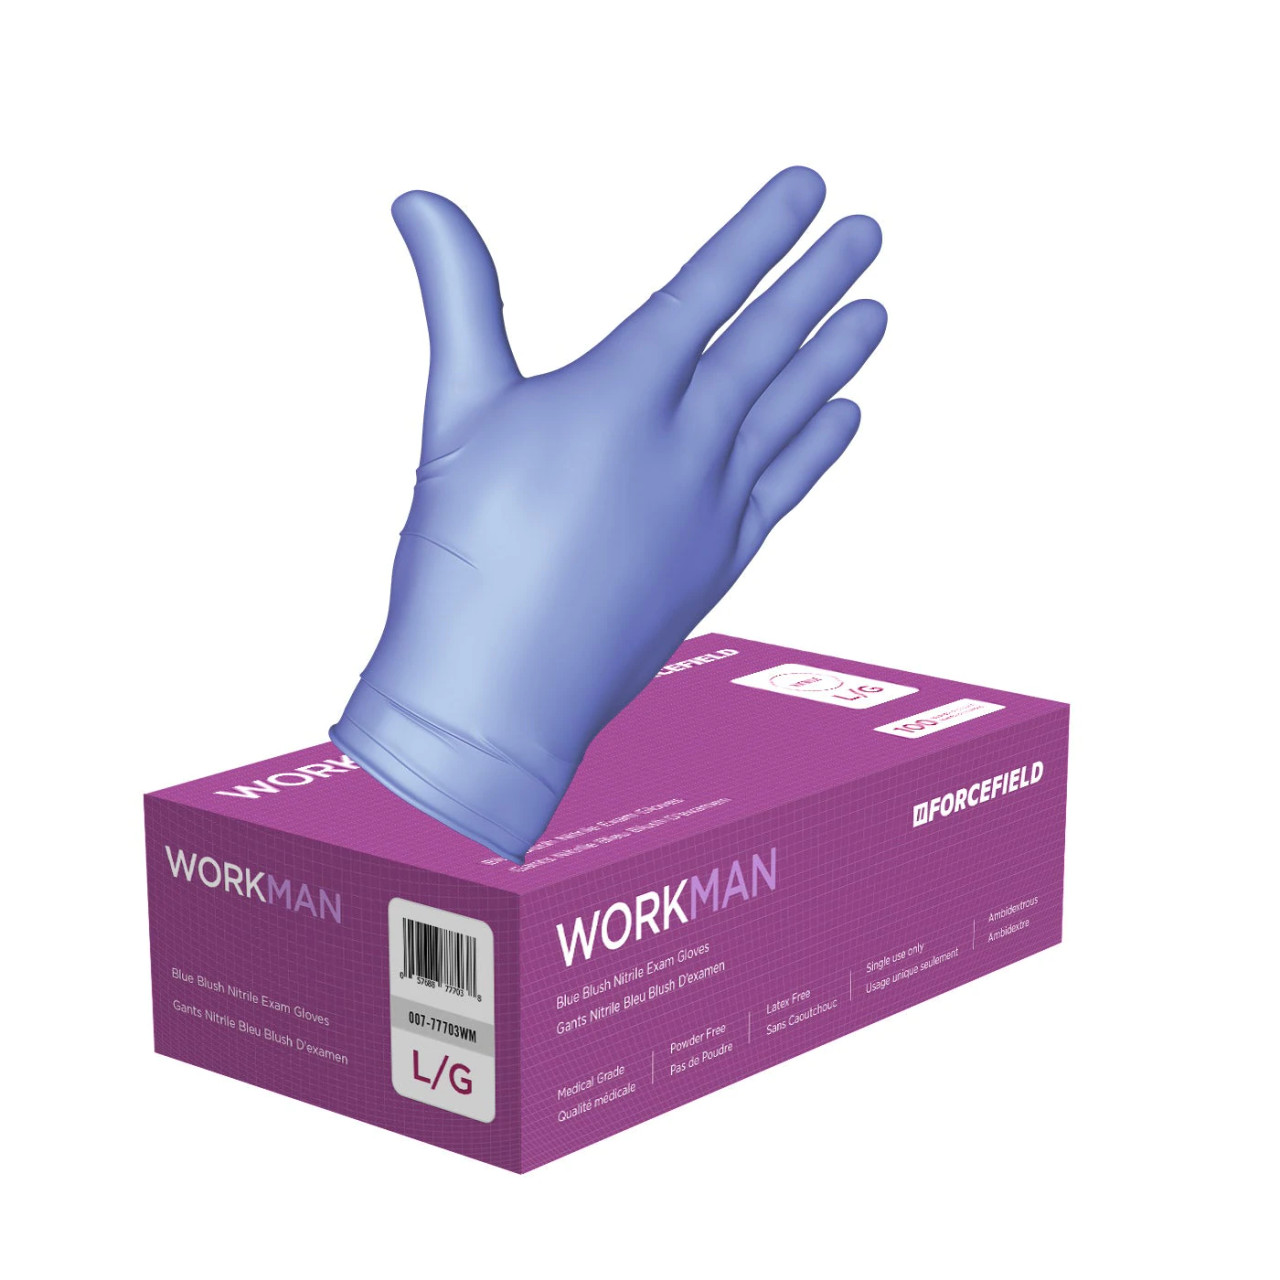 NitriForce Pro 007-77703 NP/PF Nitrile Disposable Gloves Large (Case of 1000 Gloves)